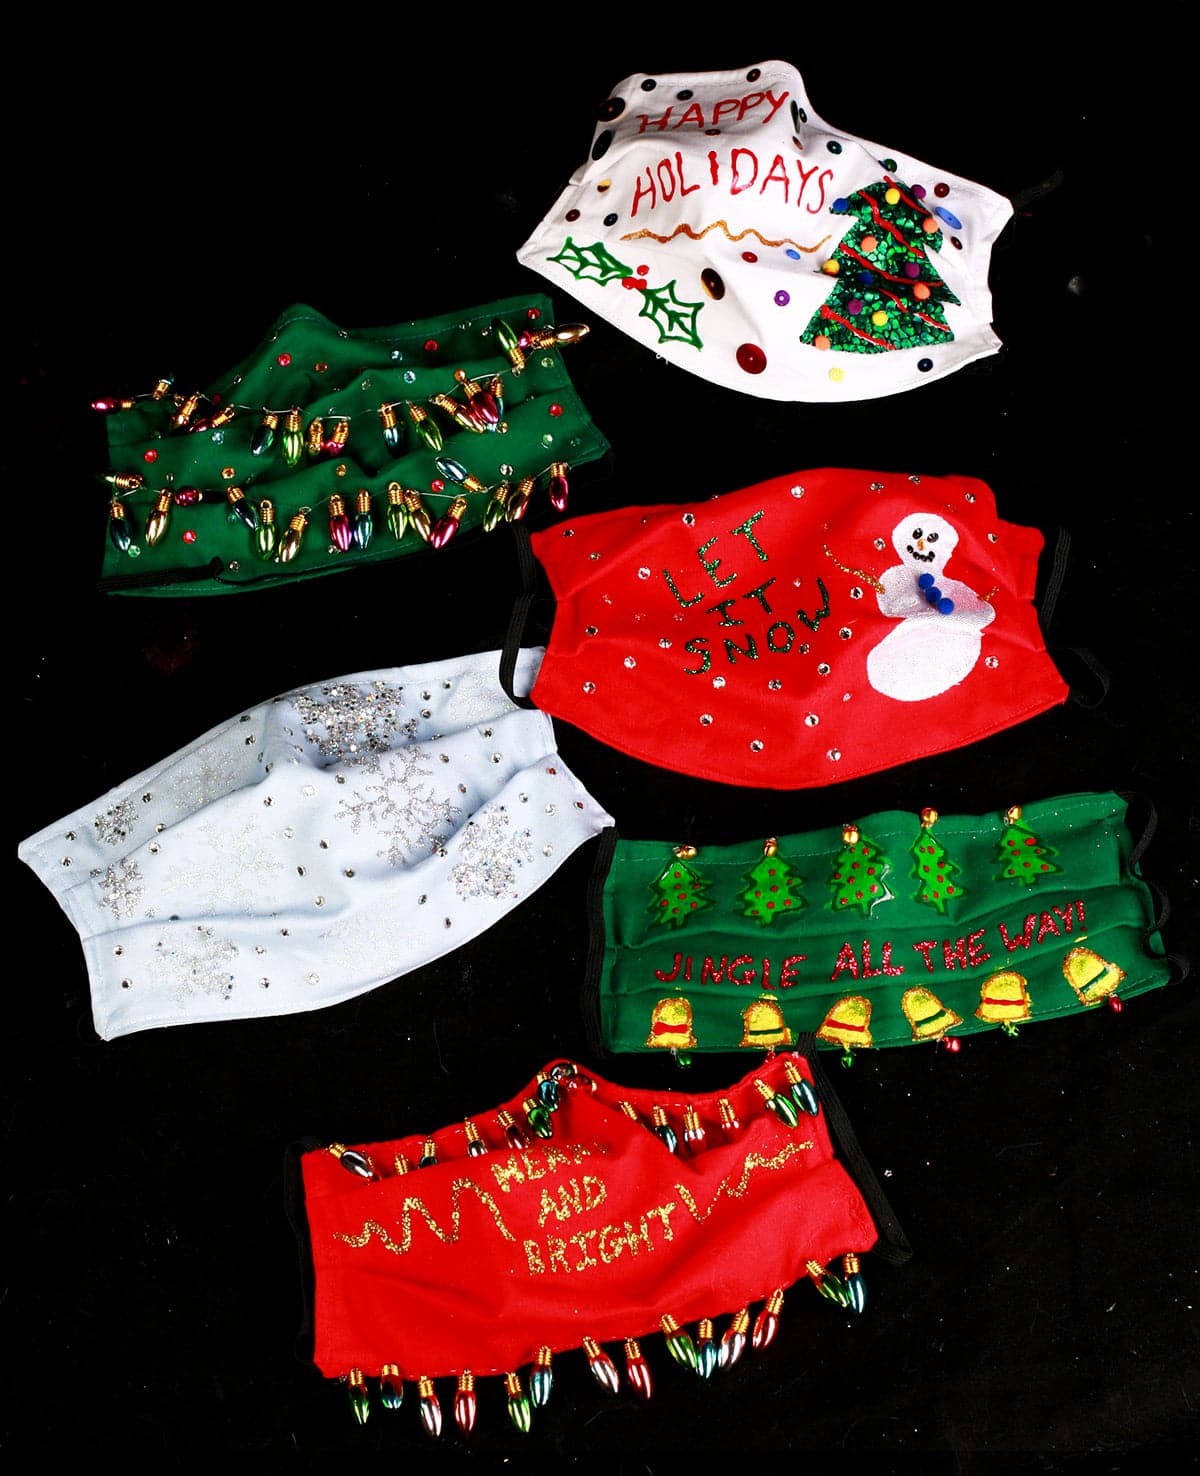 An array of 6 gaudily decorated "Ugly Christmas Sweater" style face masks, on a black background.